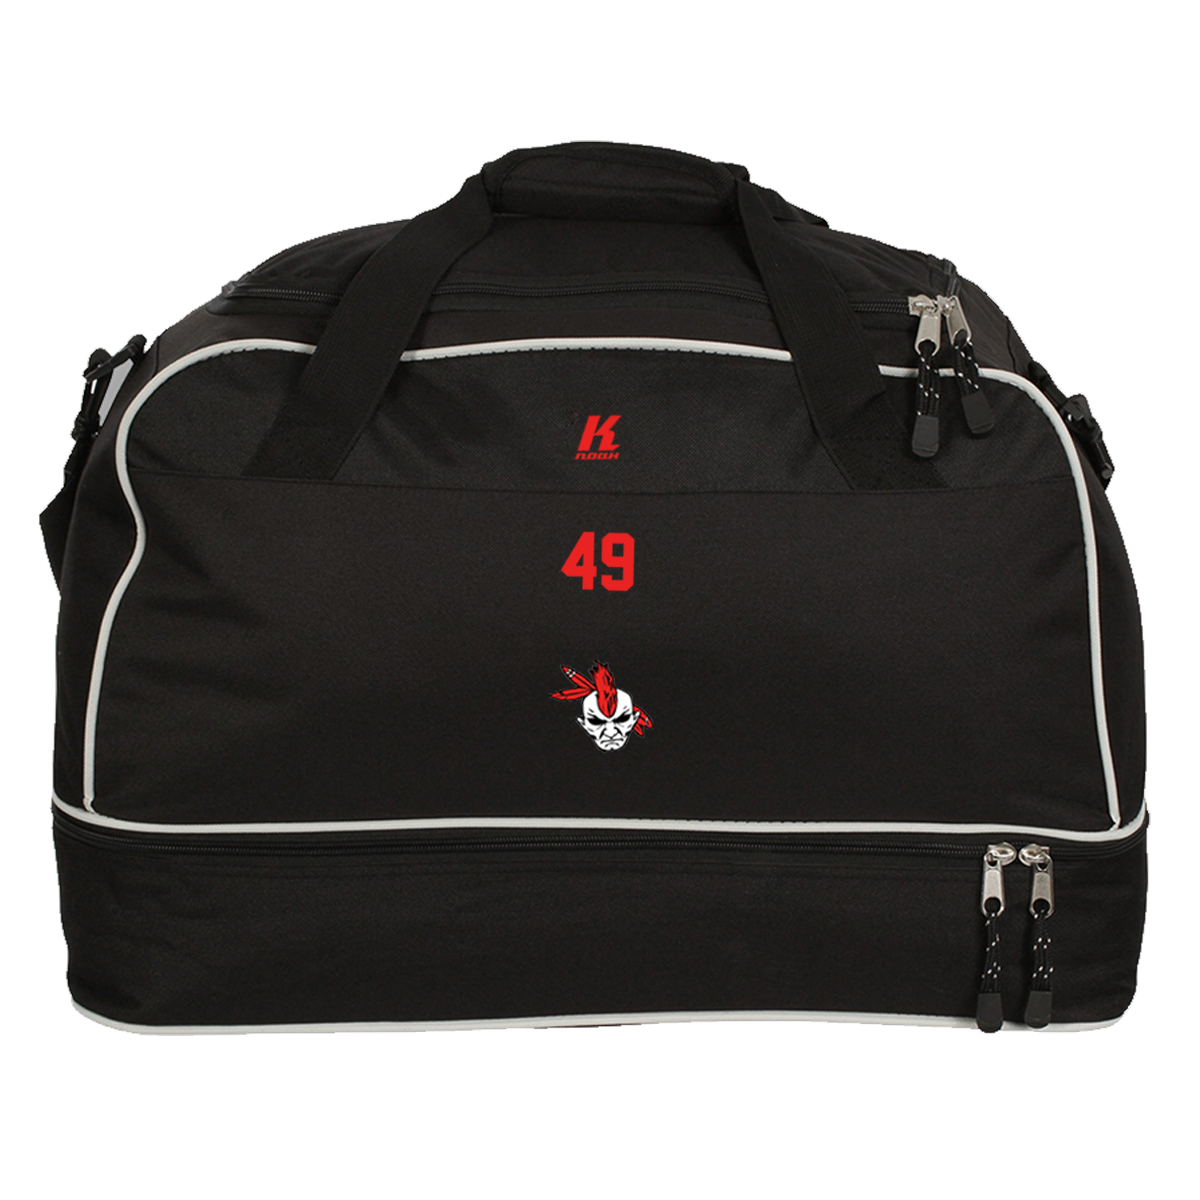 Warriors Players CT Bag with Playernumber or Initials